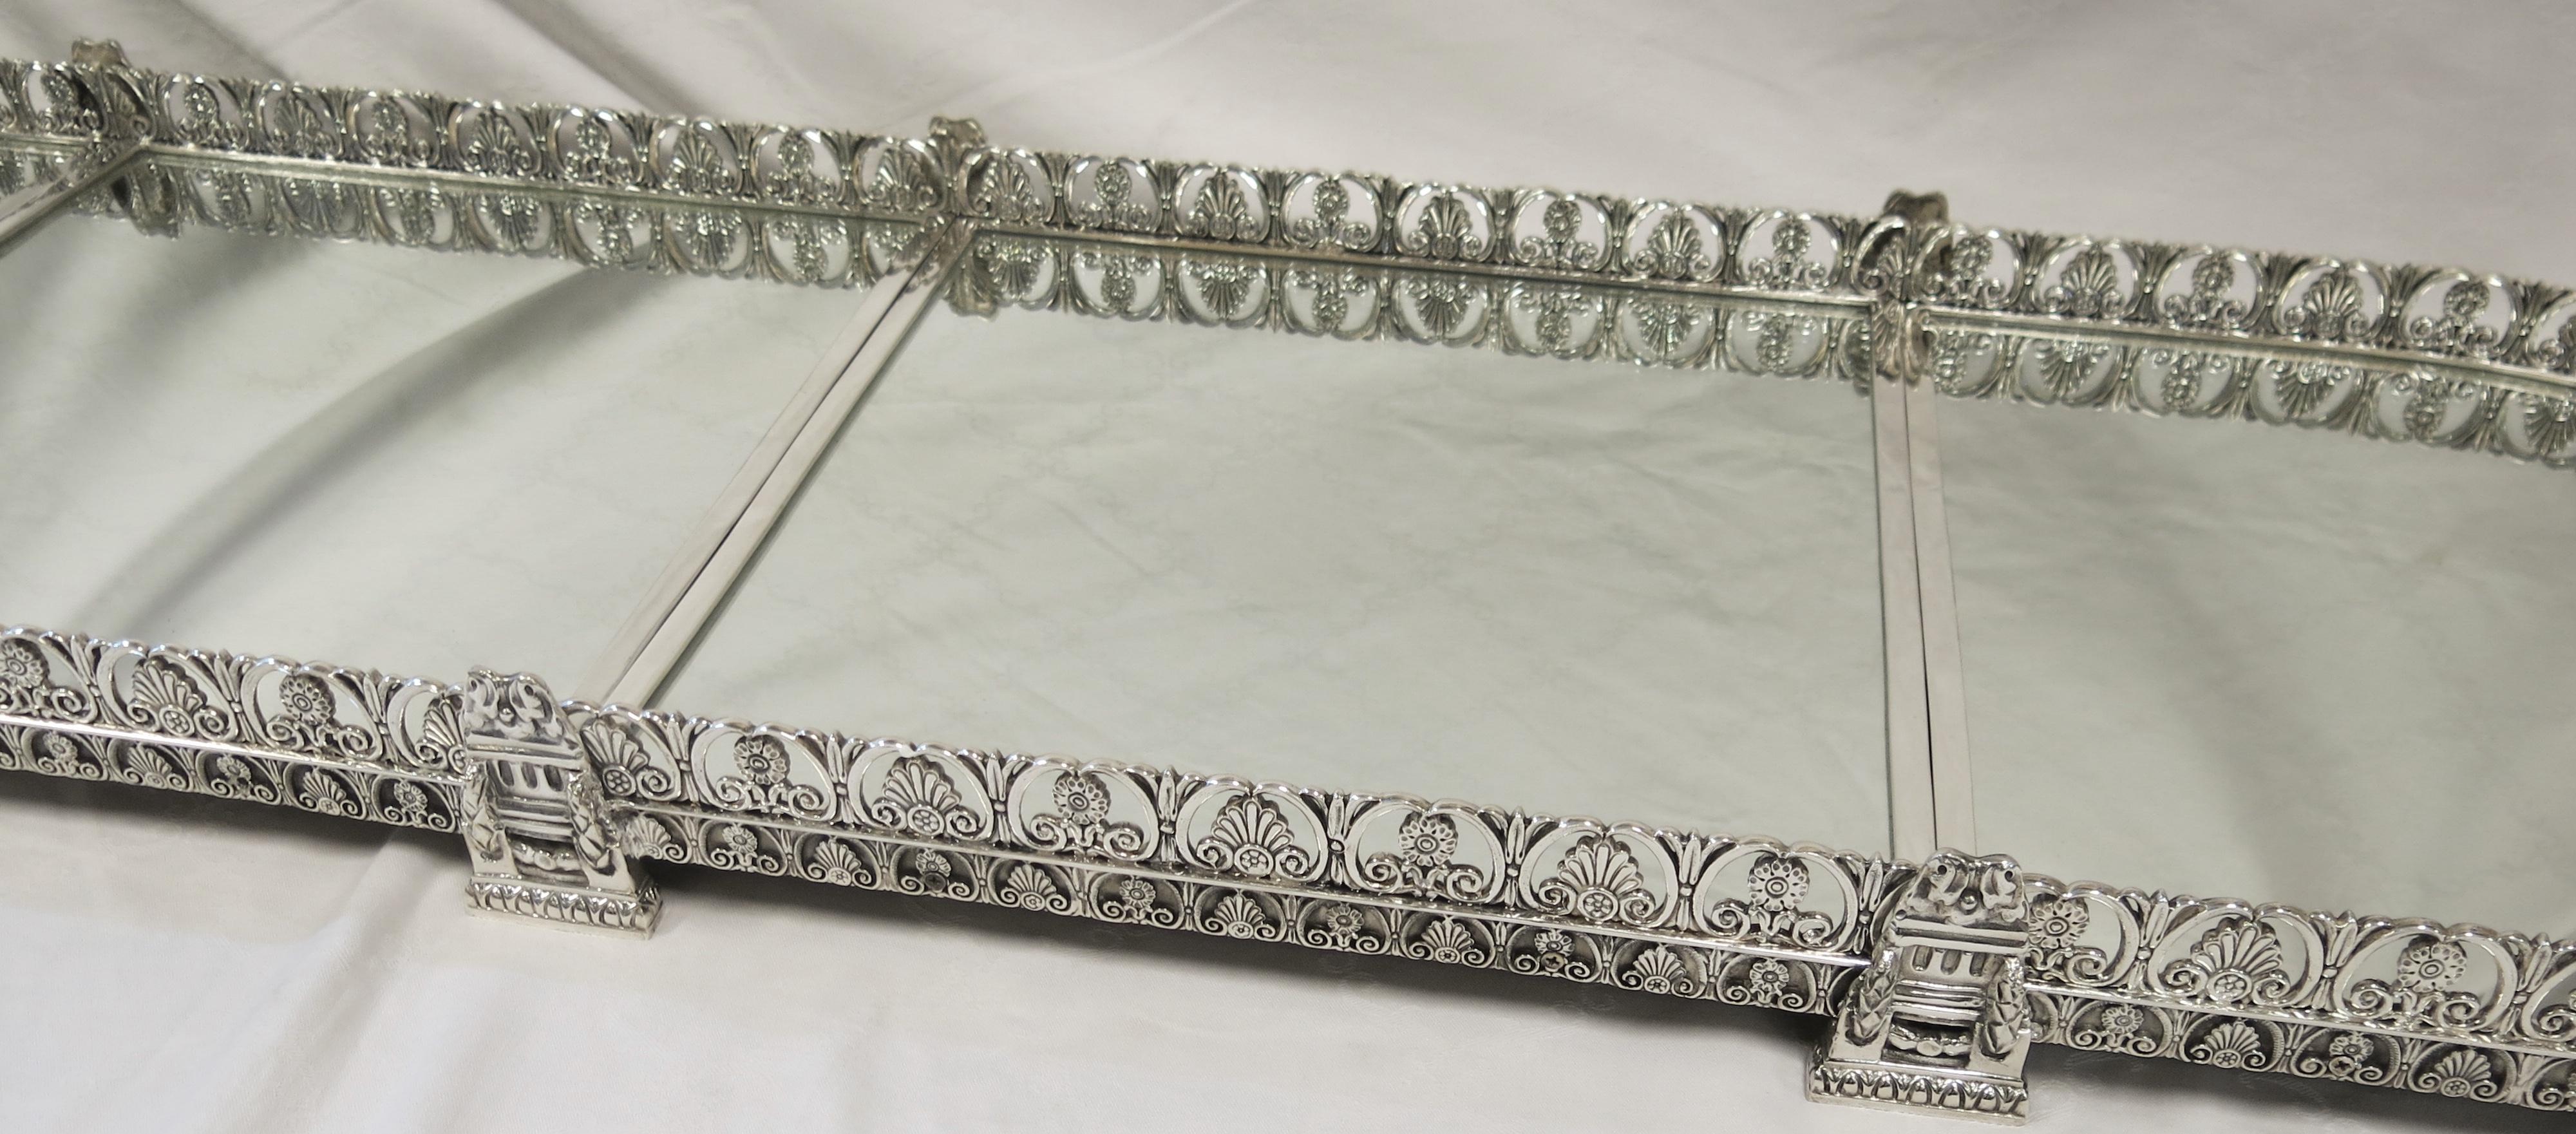 Four-Section Mirrored Top Table Plateau or Surtout De Table For Sale 2